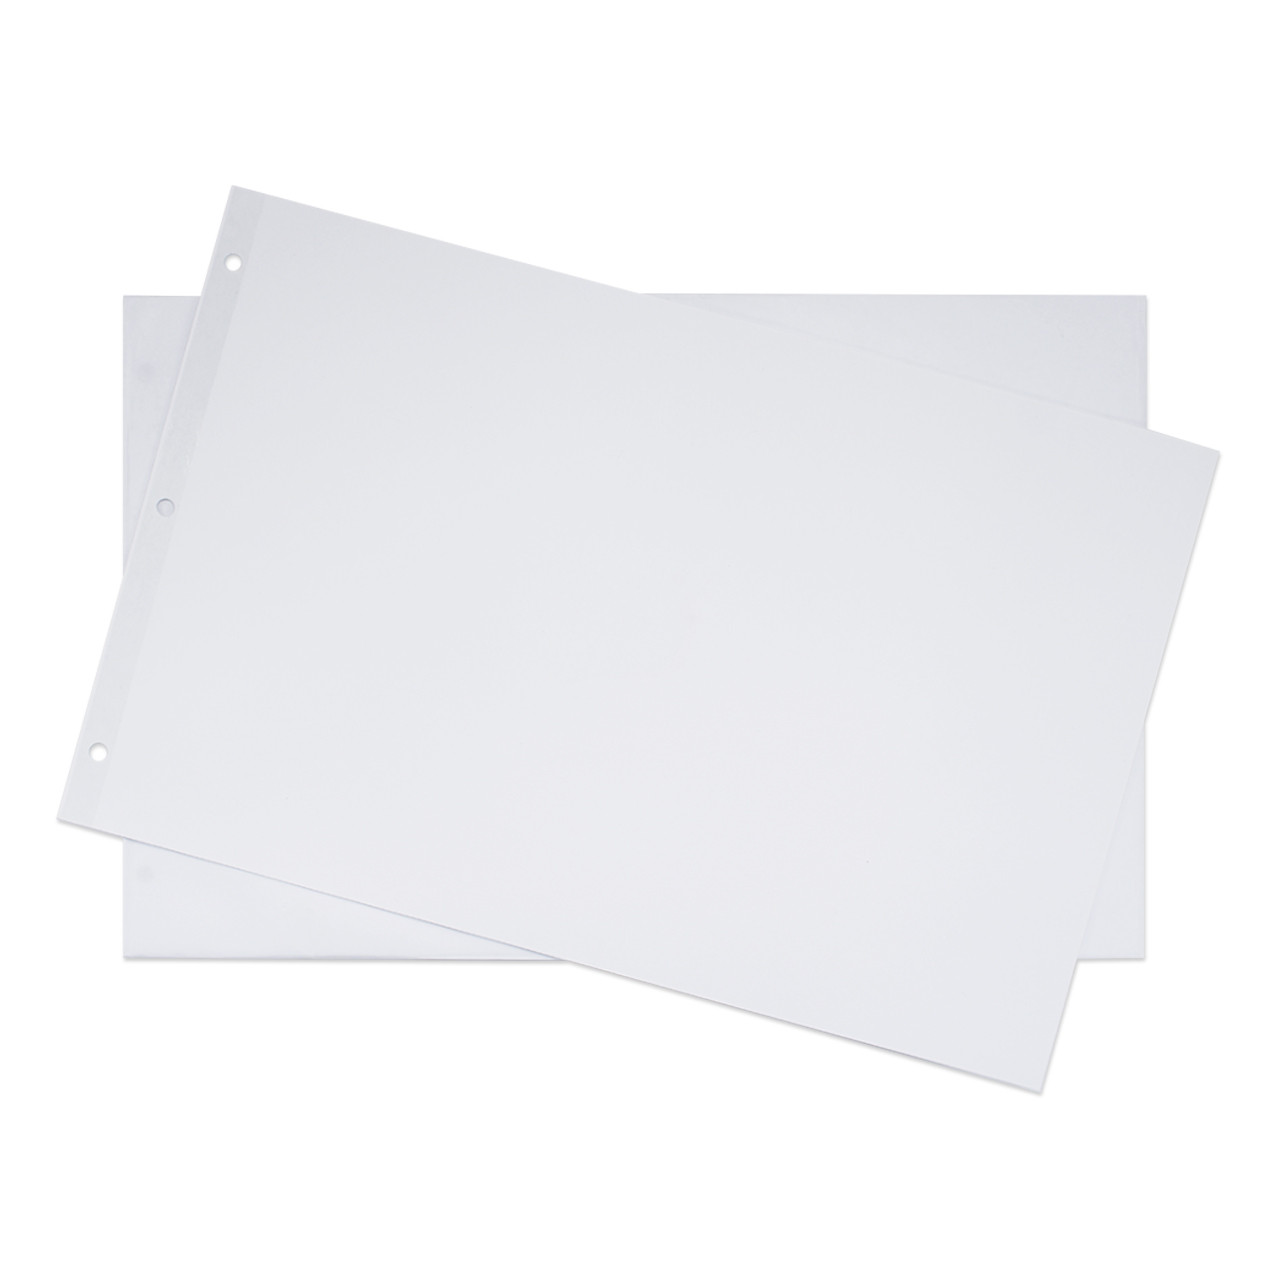 24lb 8.5 x 11 3-Hole Punched Reinforced Edge Paper - 2500 Sheets